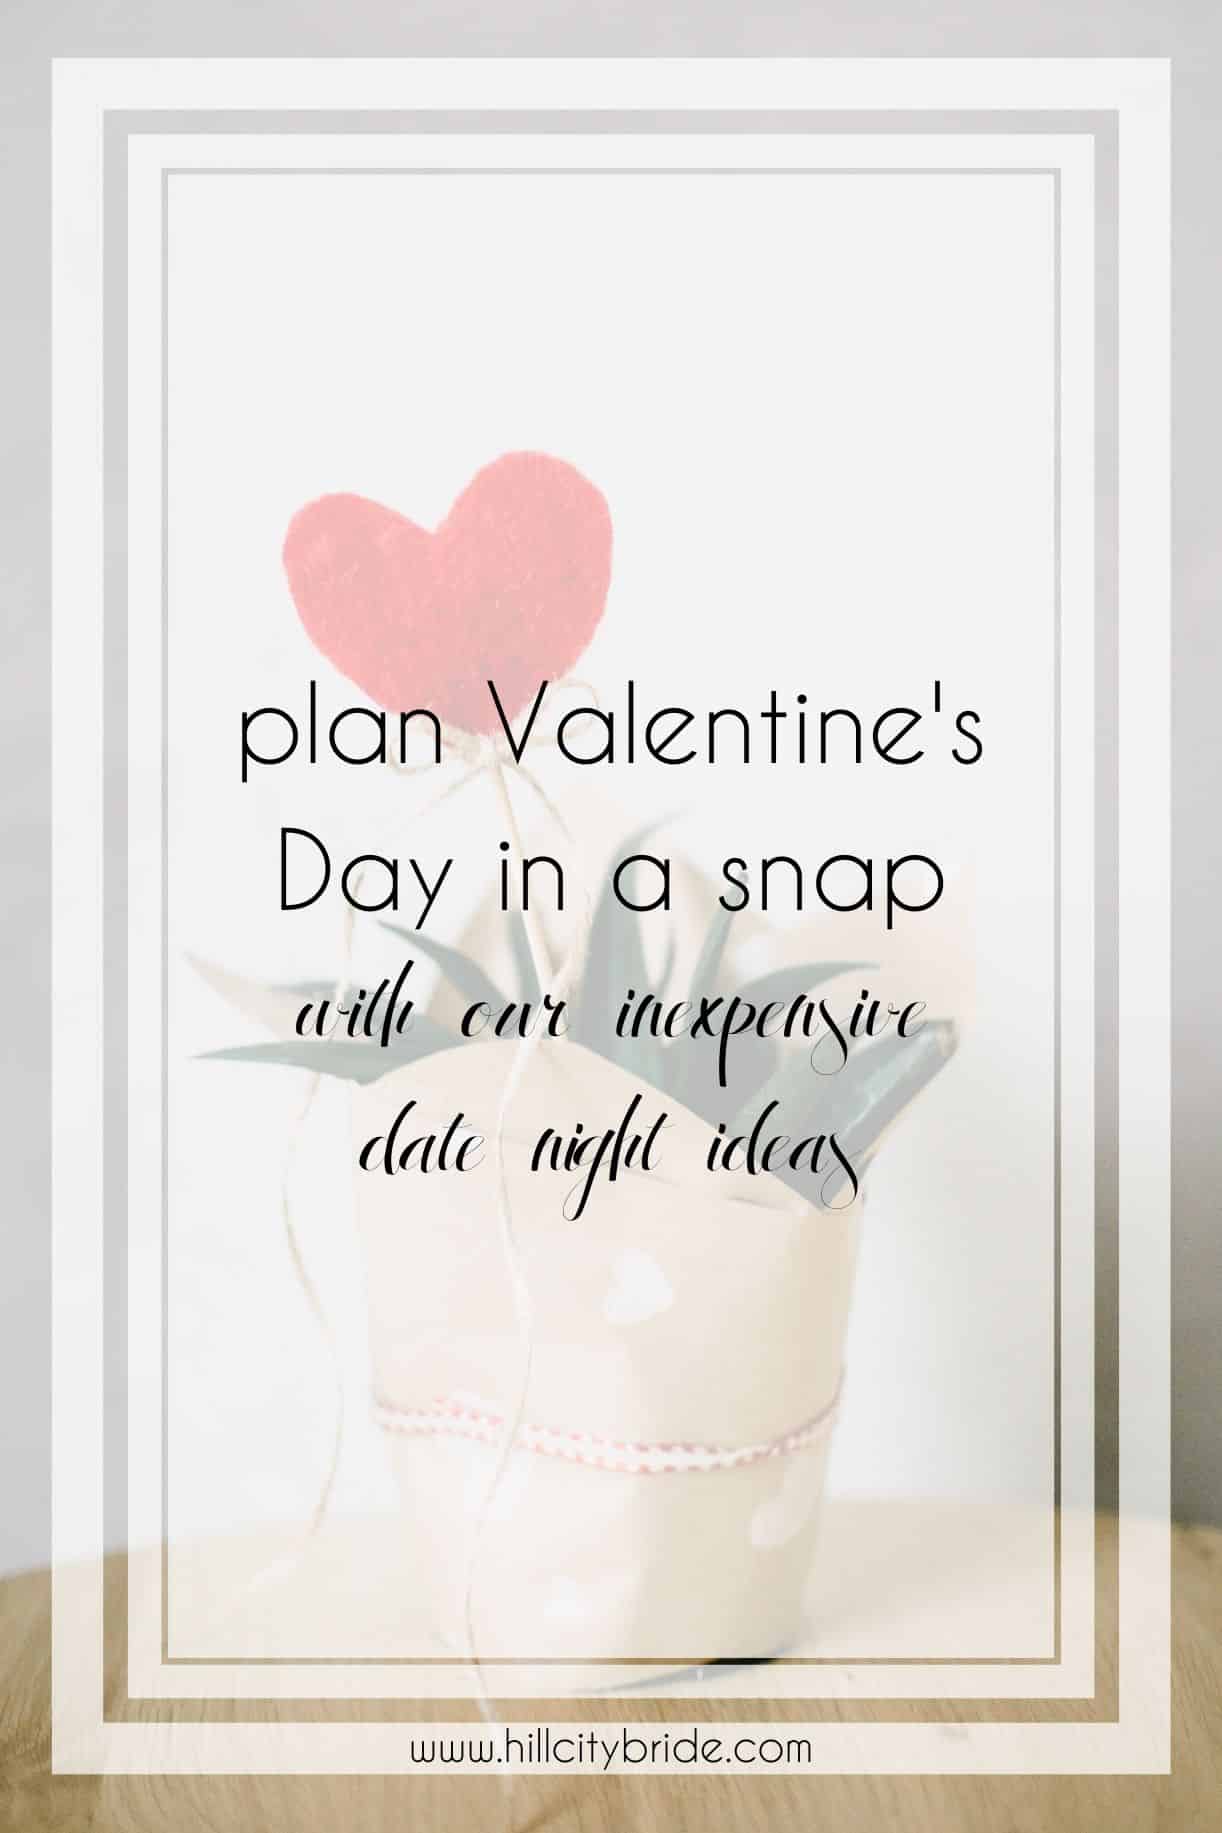 Plan Valentine's Day in a Snap With Our Inexpensive Date Ideas